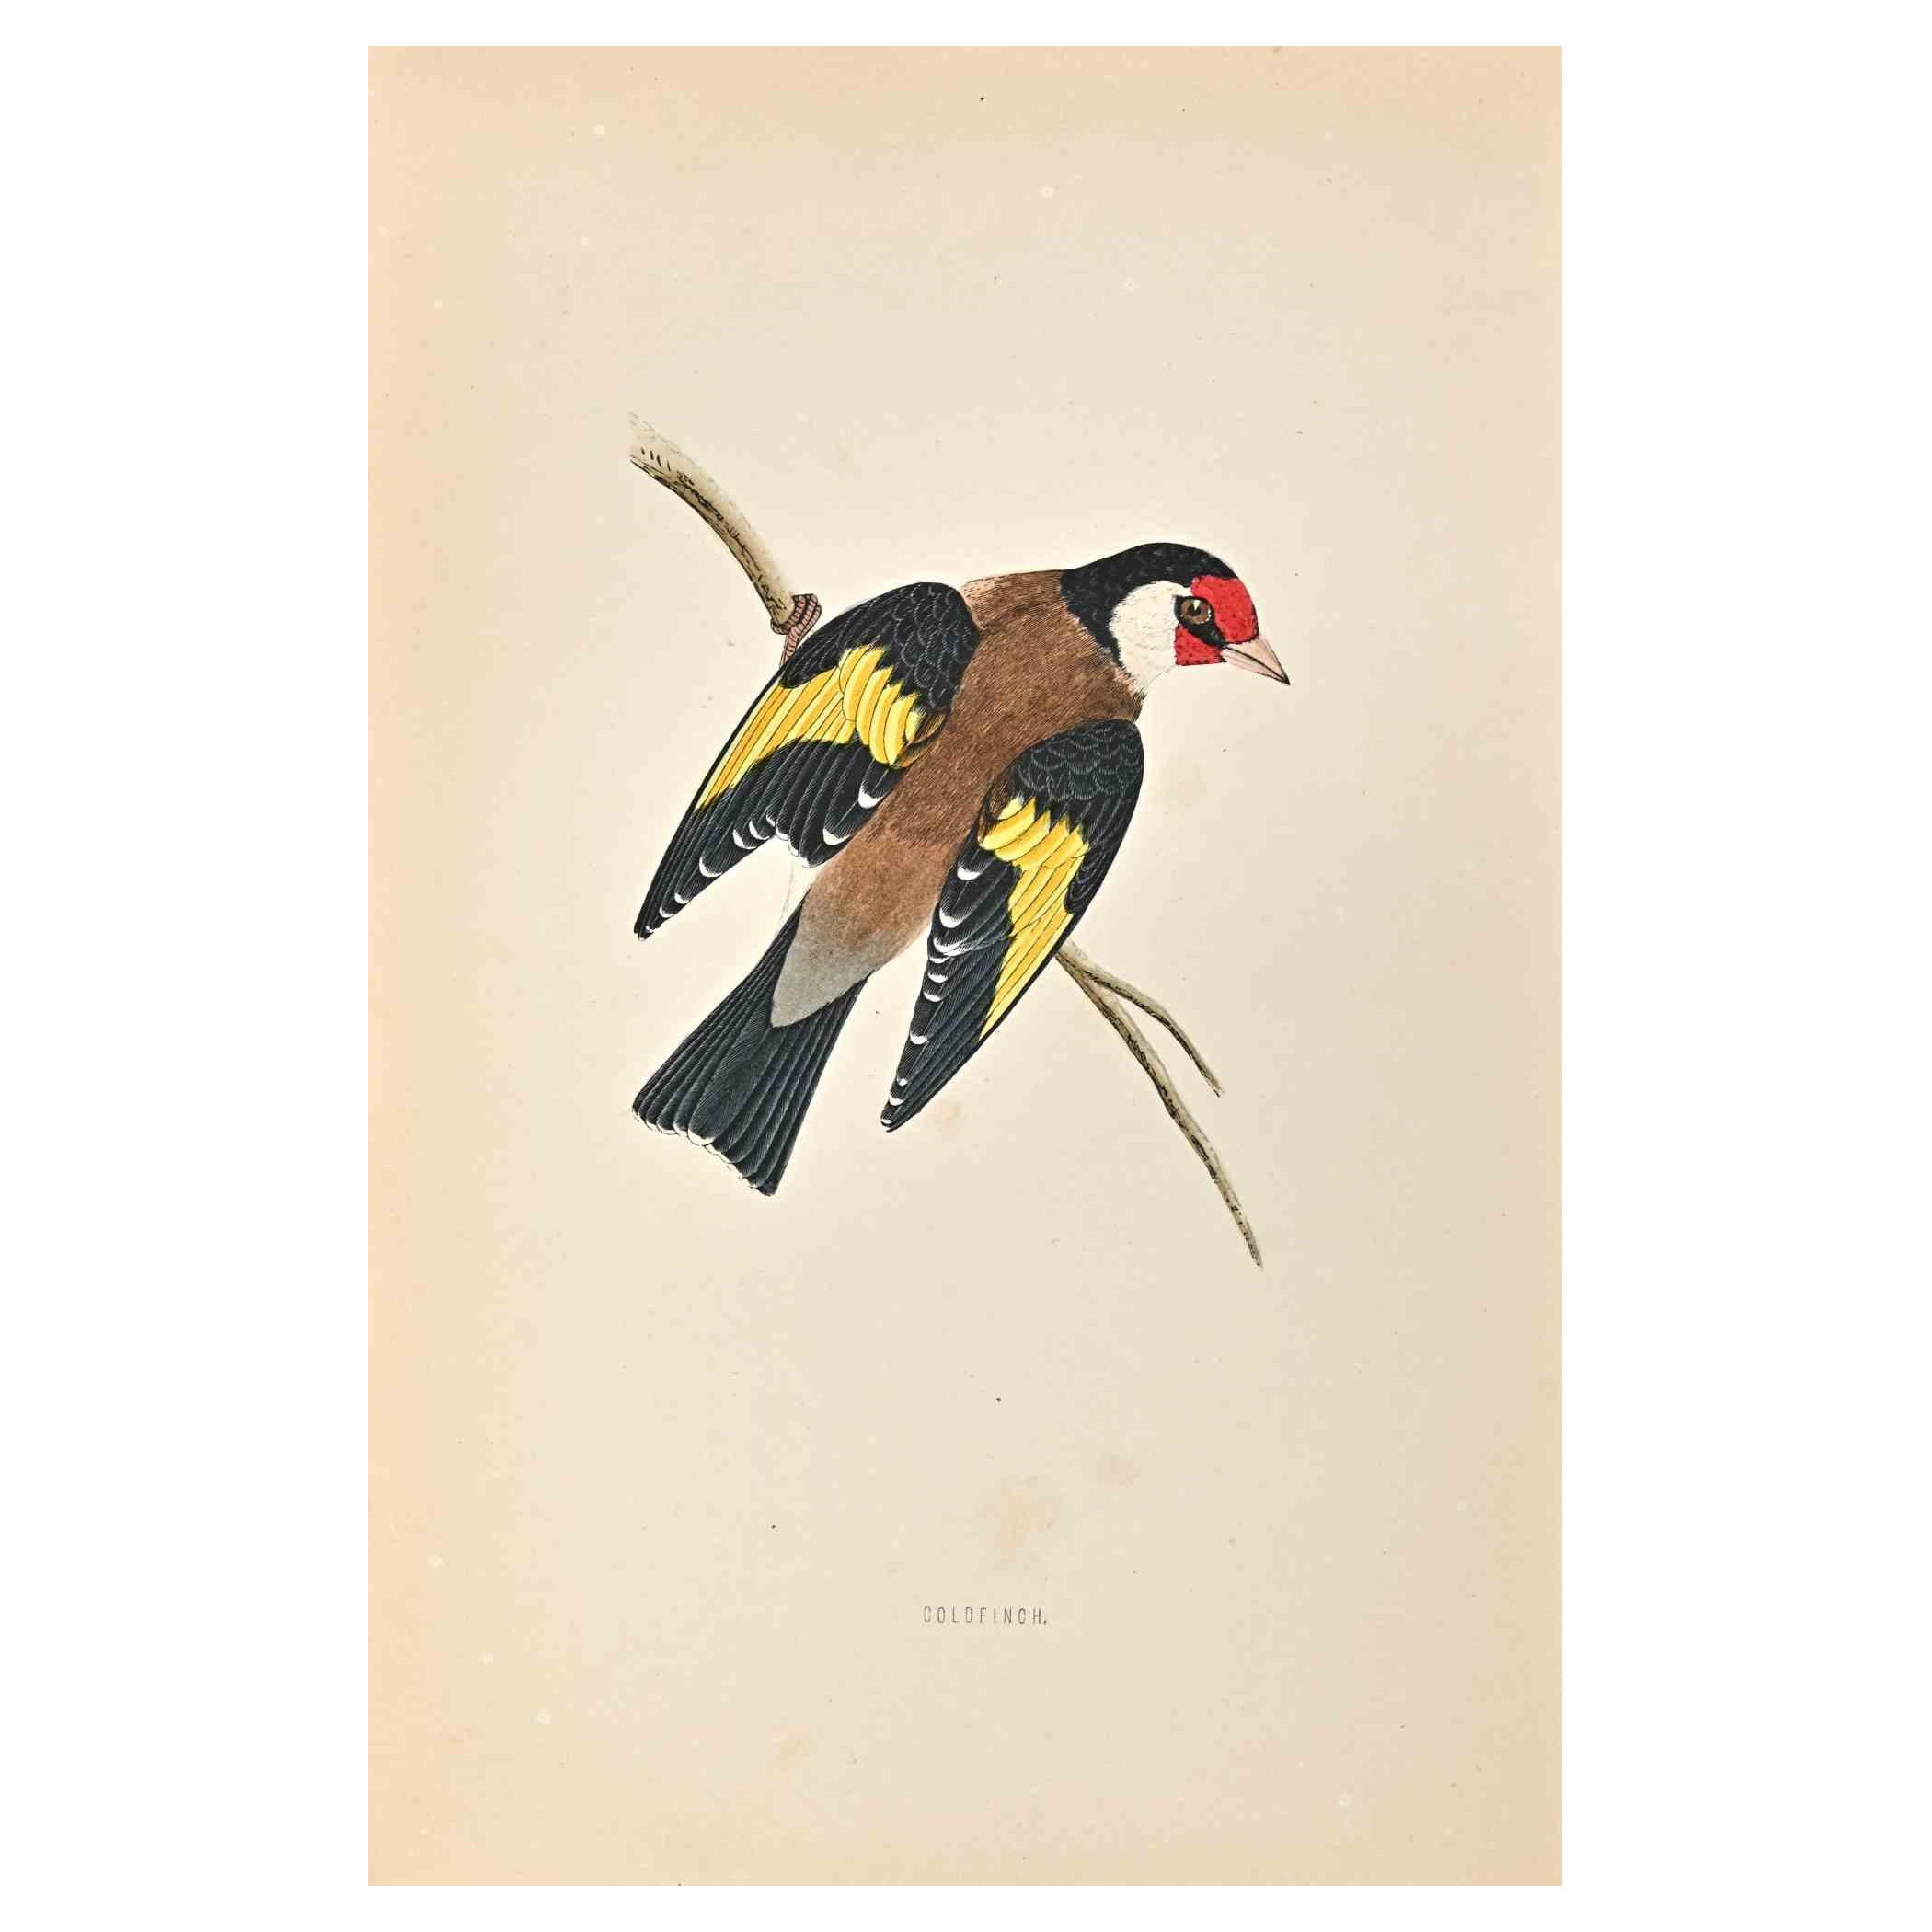 Goldfingh is a modern artwork realized in 1870 by the British artist Alexander Francis Lydon (1836-1917) . 

Woodcut print, hand colored, published by London, Bell & Sons, 1870.  Name of the bird printed in plate. This work is part of a print suite